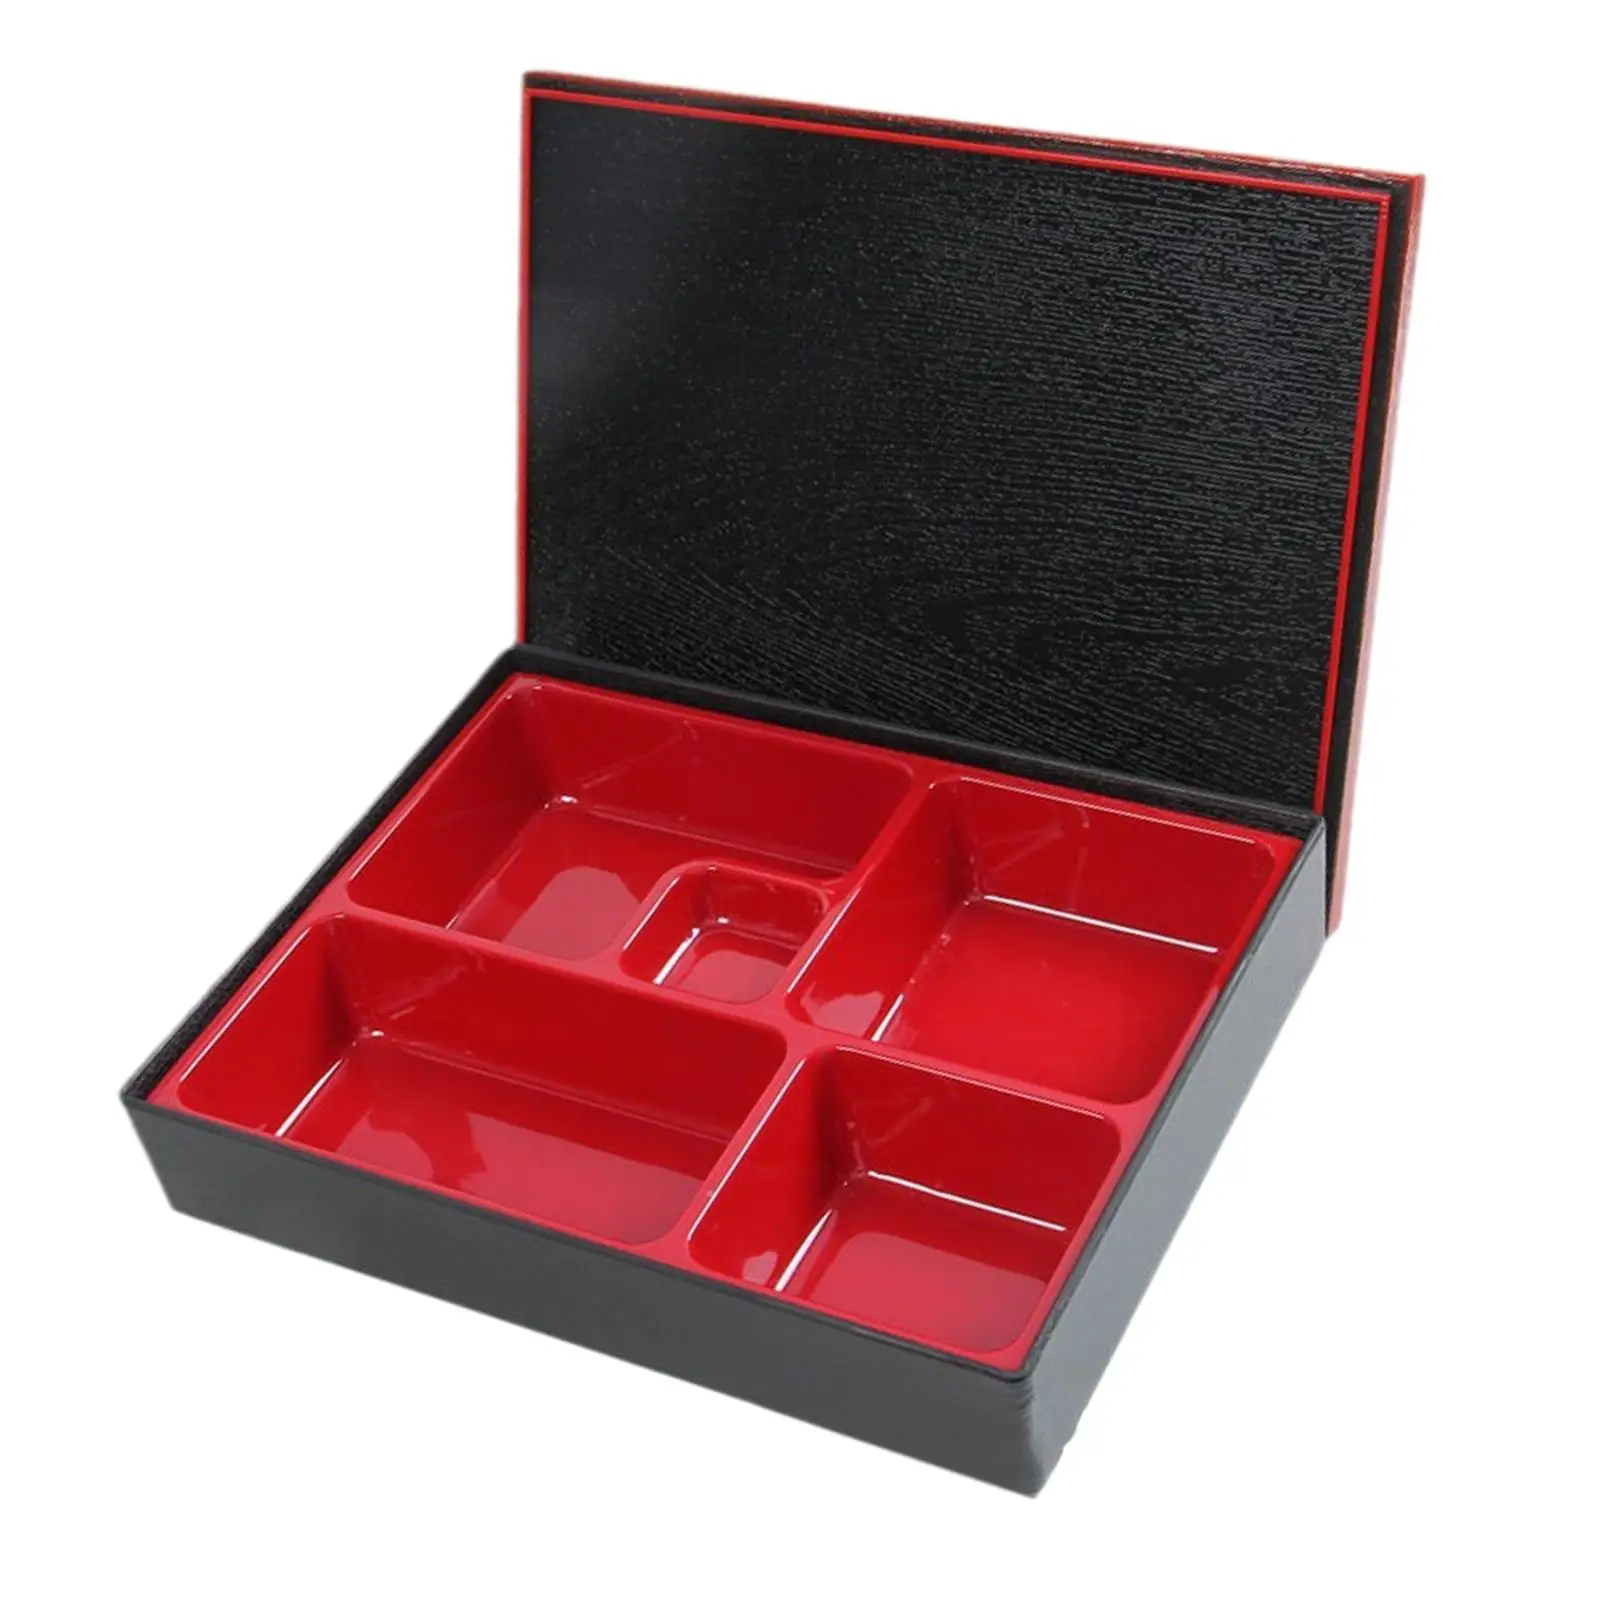 Japanese Bento Box with Lid 5 Compartments Serving Dish Lunch Bento Box Traditional Bento Box for Sushi, Rice, Sauce Picnic Home